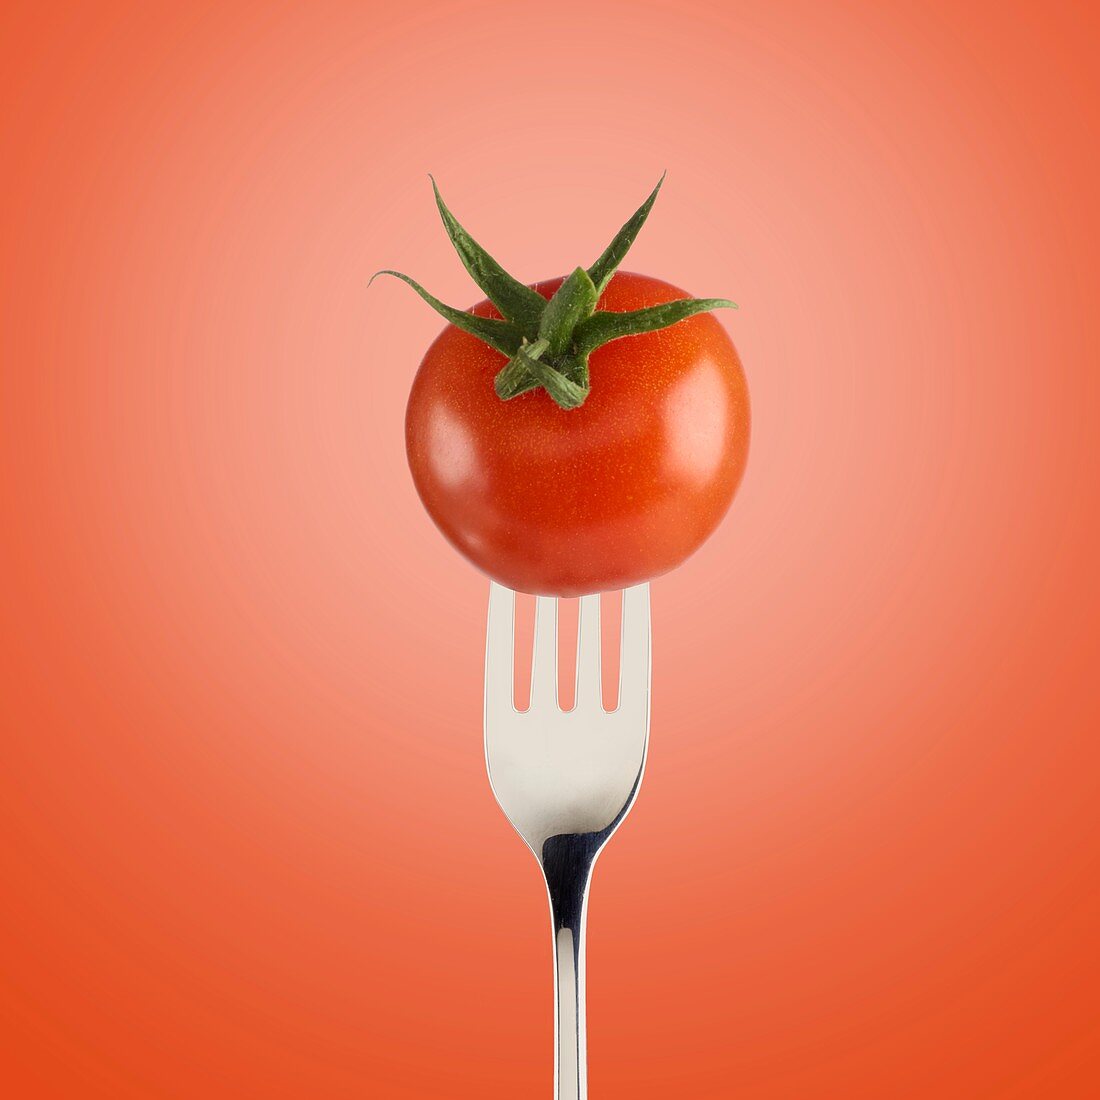 Tomato on a fork